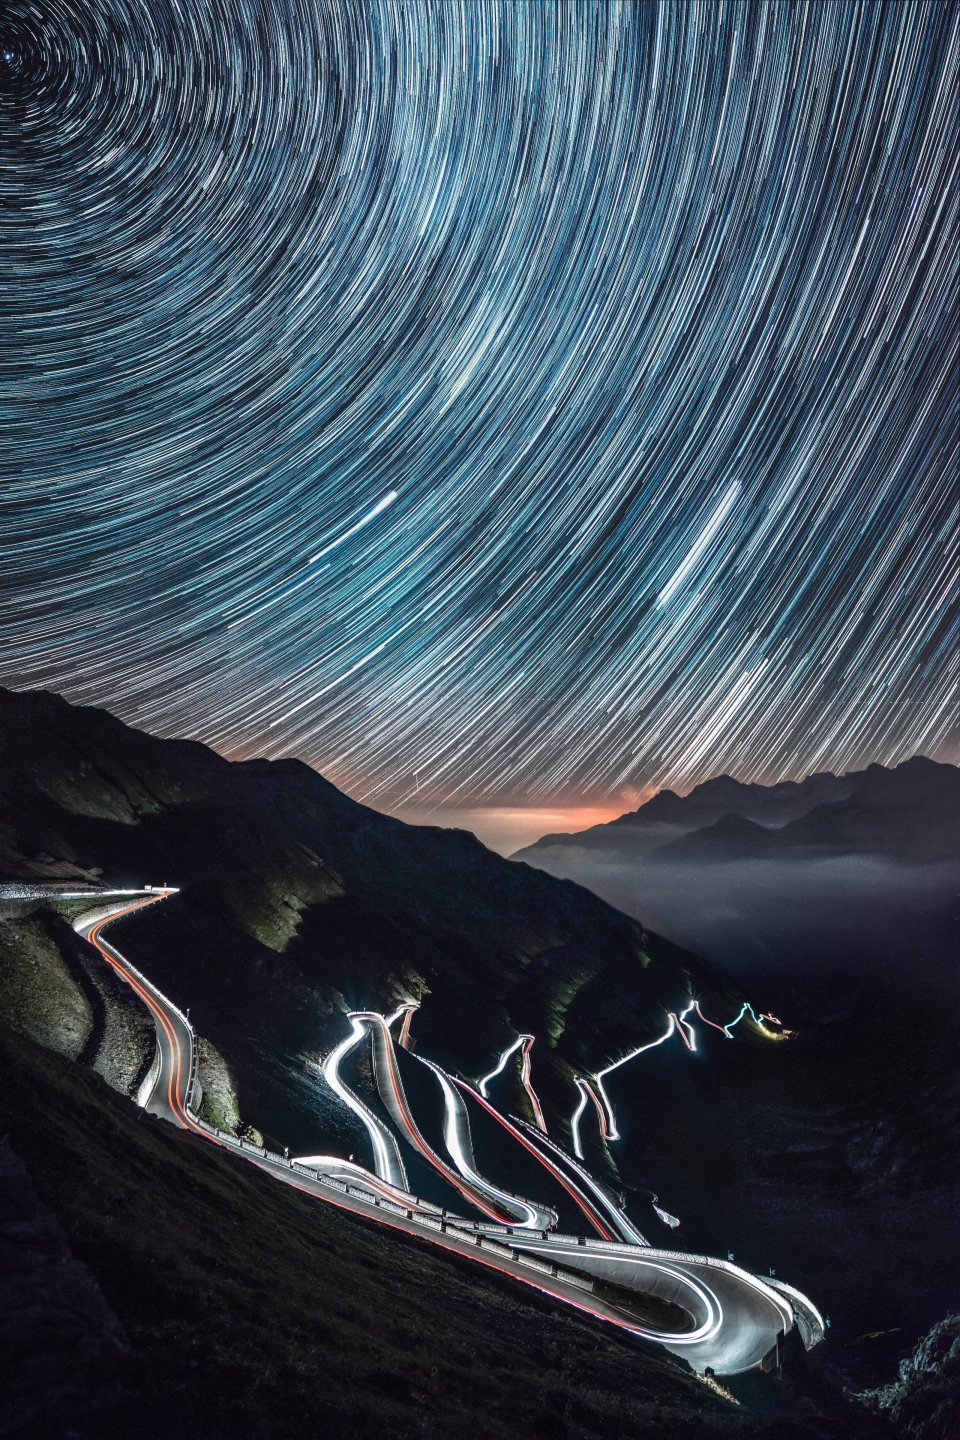 Looks Like Your Phone Could Use A New Wallpaper 56 - Stelvio Pass Italy Night - HD Wallpaper 